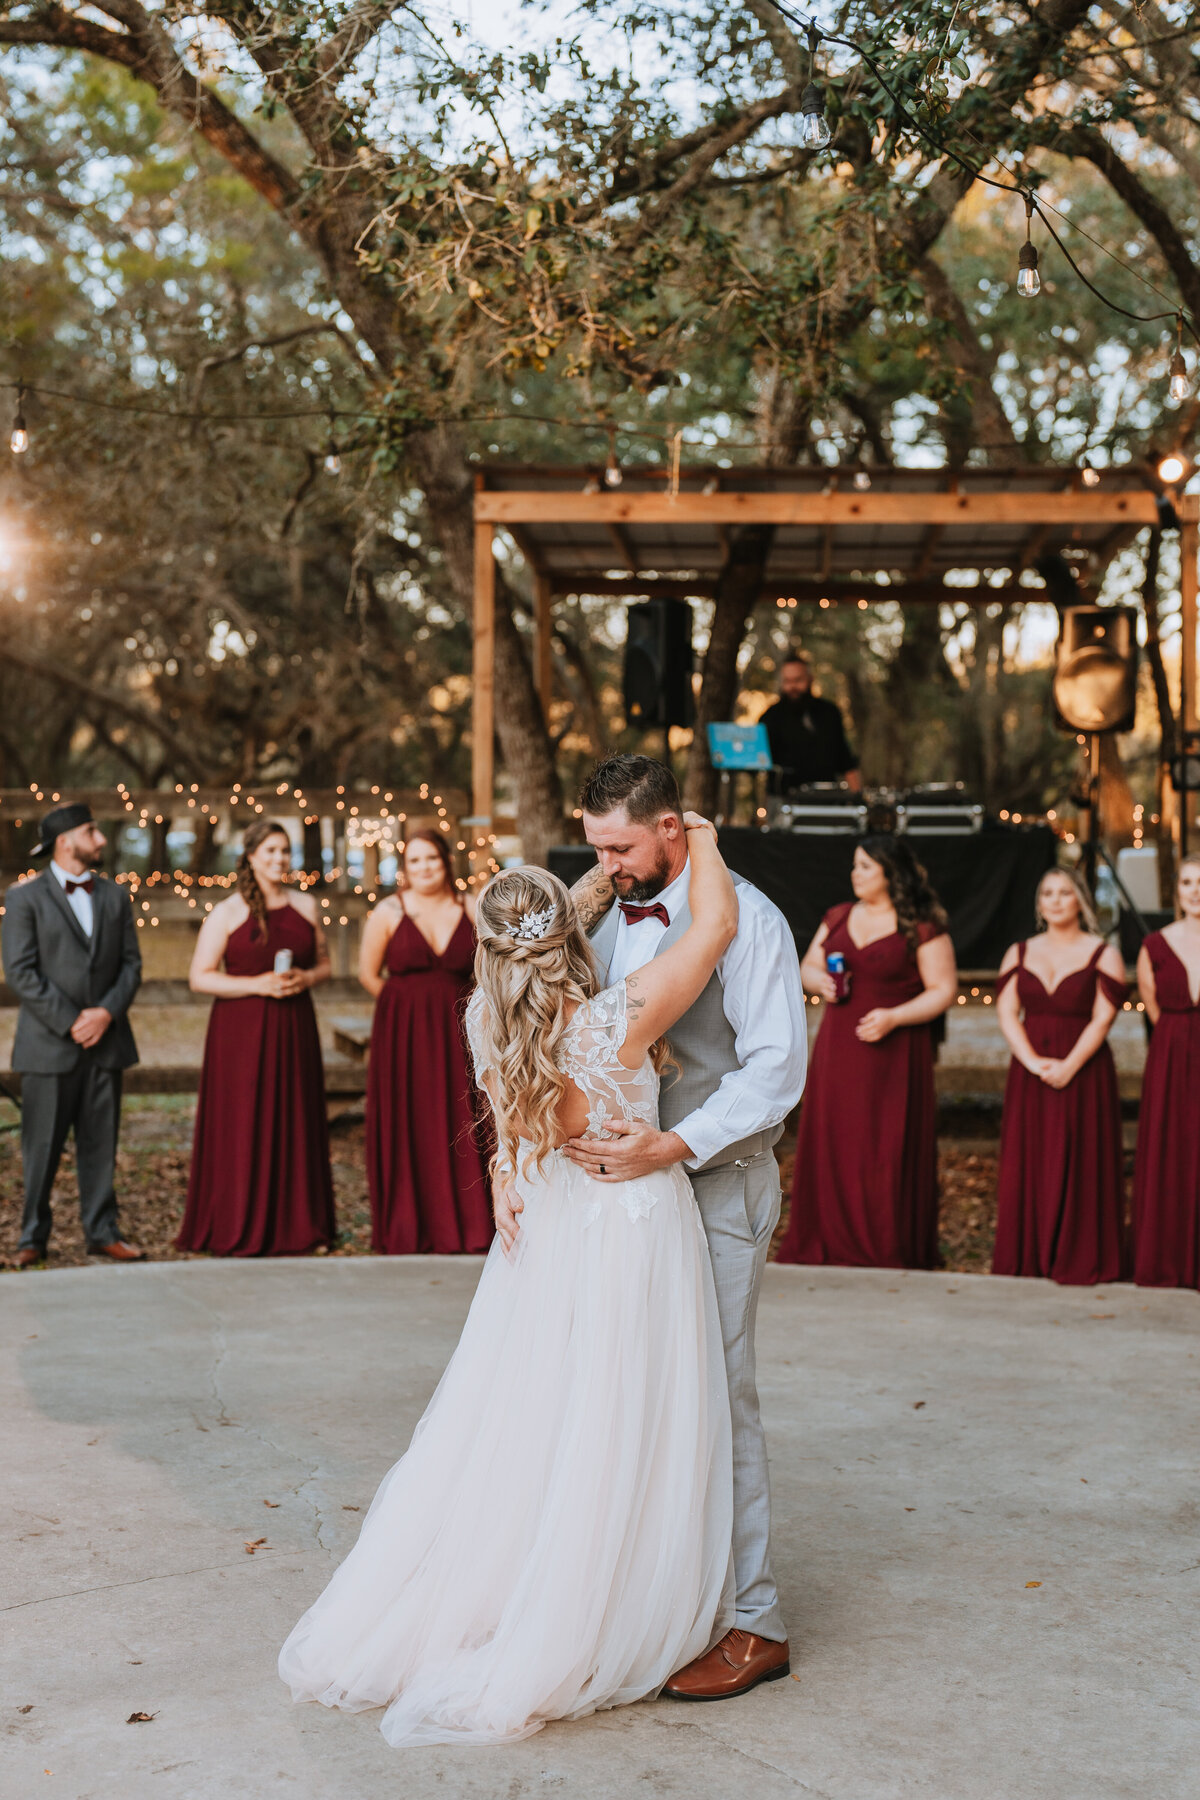 bride and groom sharing first dance at barn venue